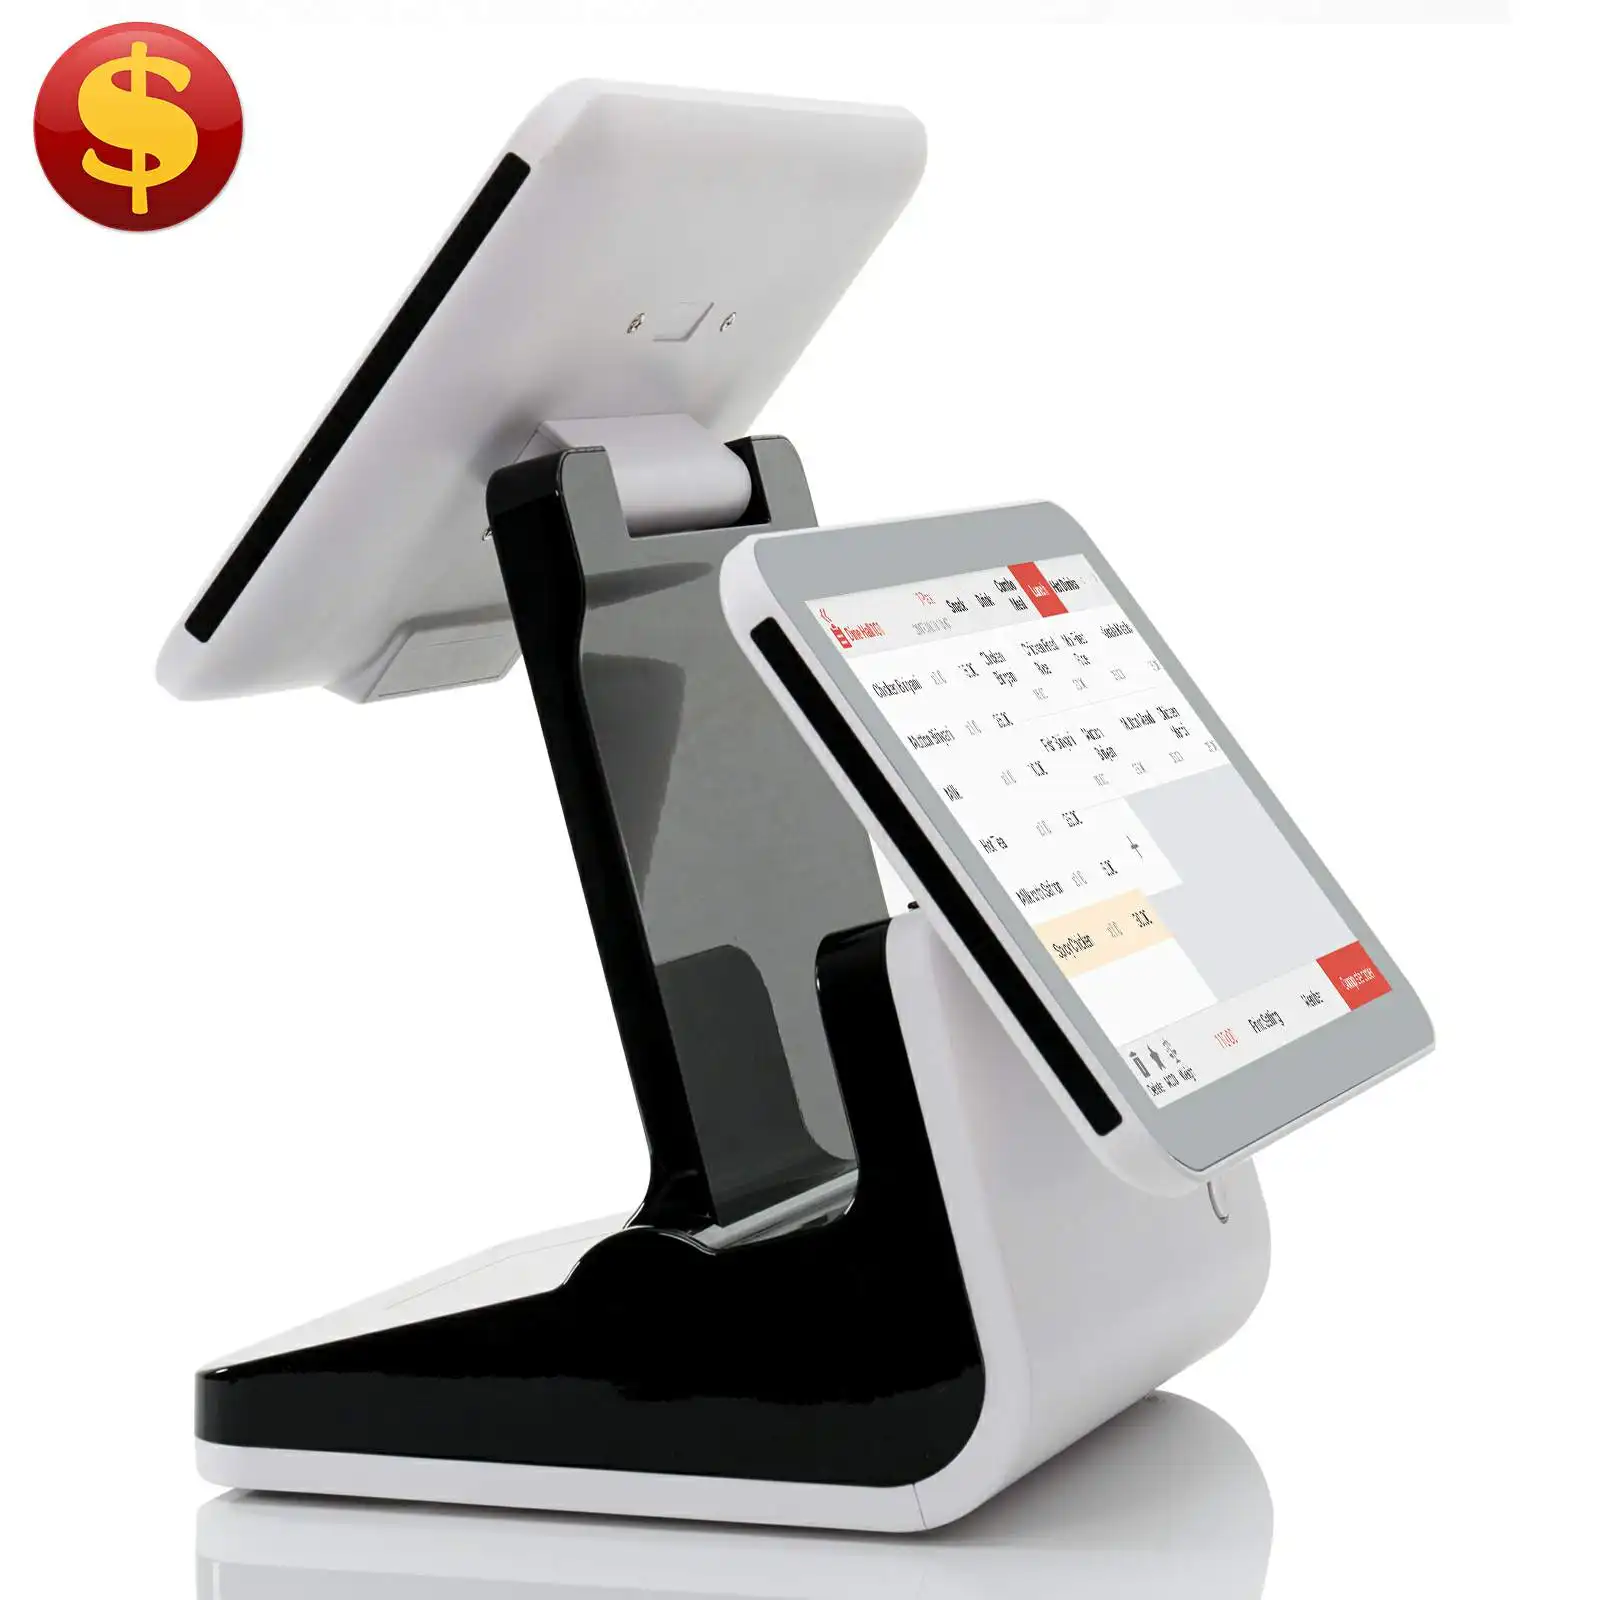 Good quality android pos terminal sdk with custom